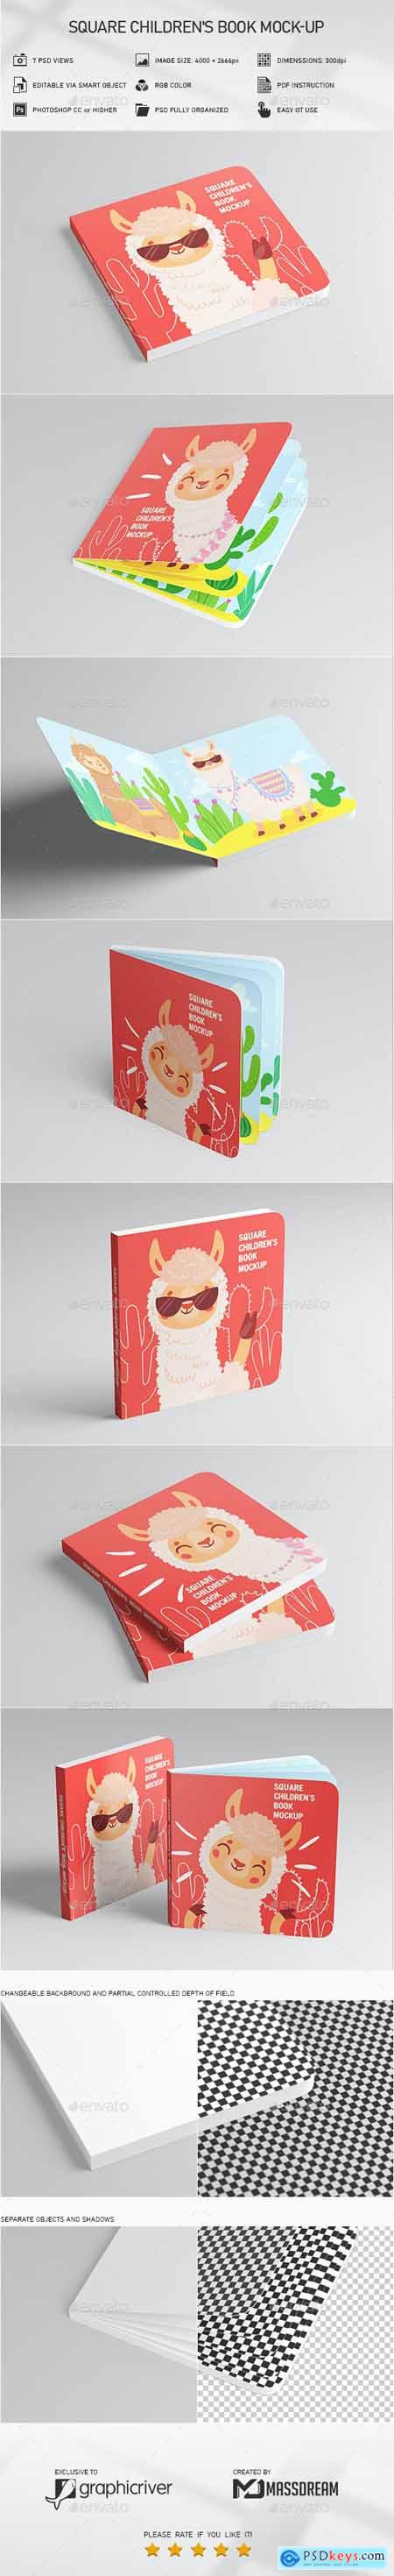 Square Childrens Book Mock-Up 29436553